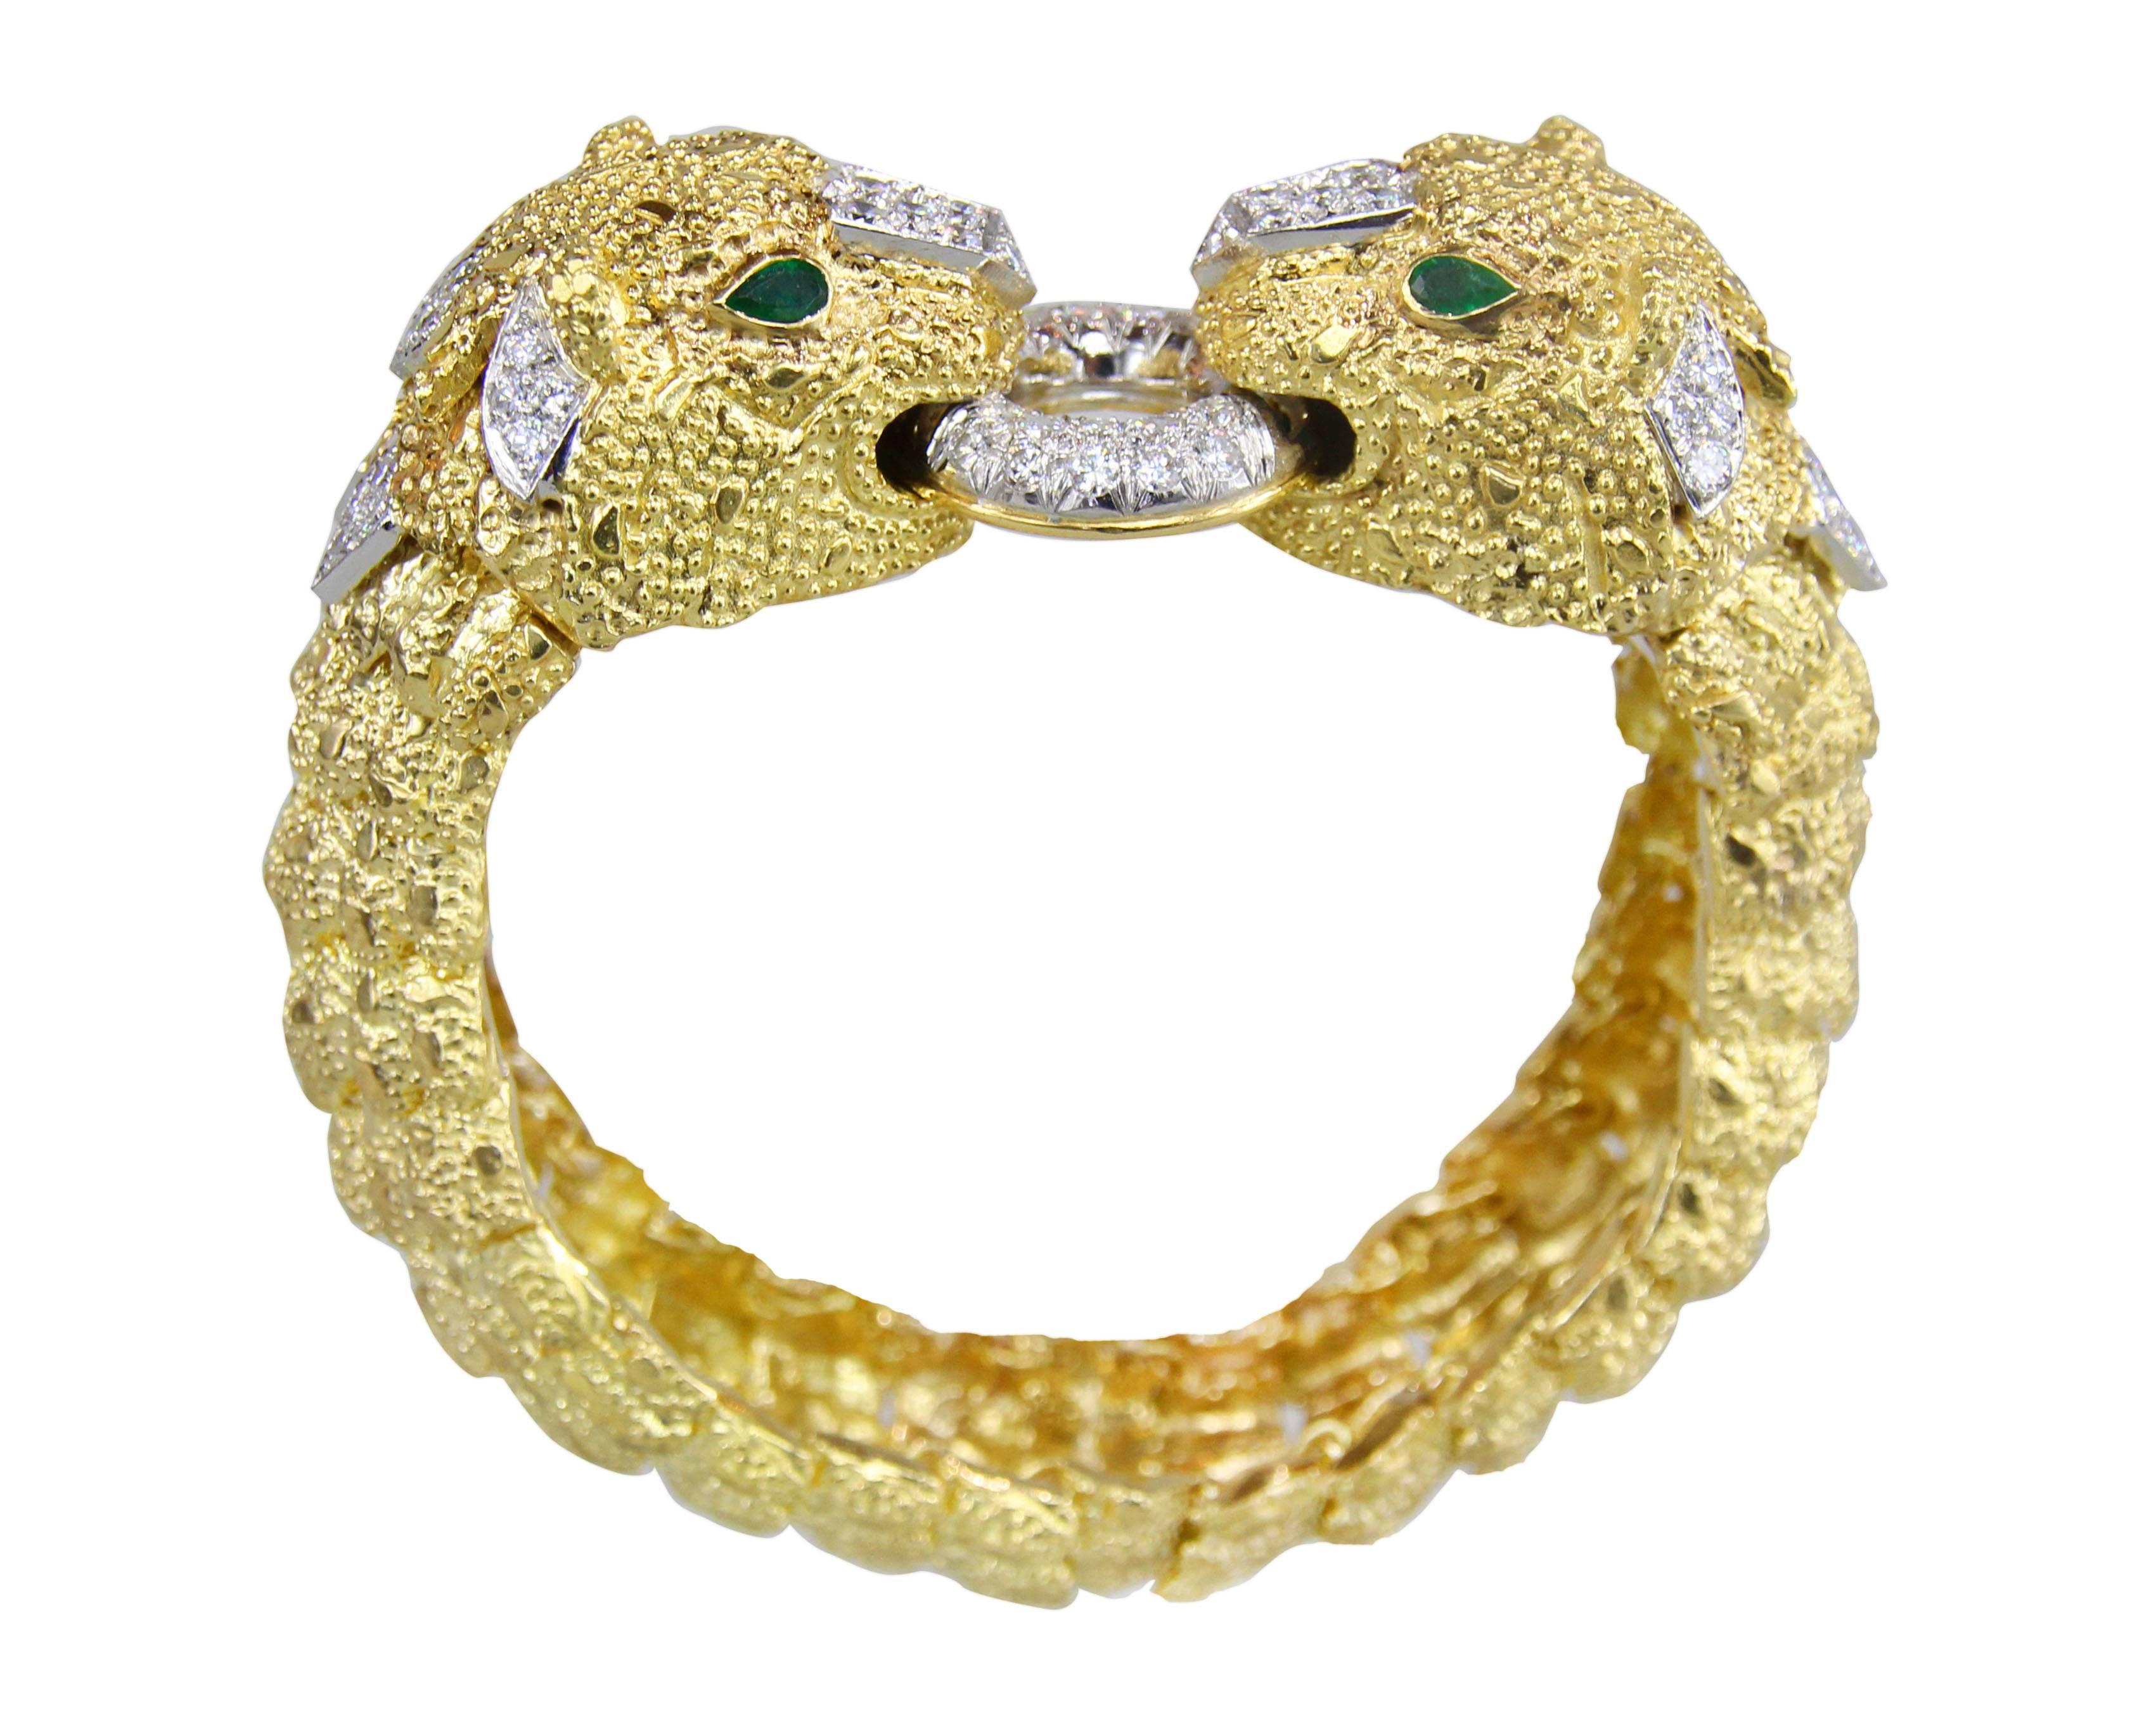 Modern Diamond Gold Panther Bracelet with Interchangeable Emerald Bead Section